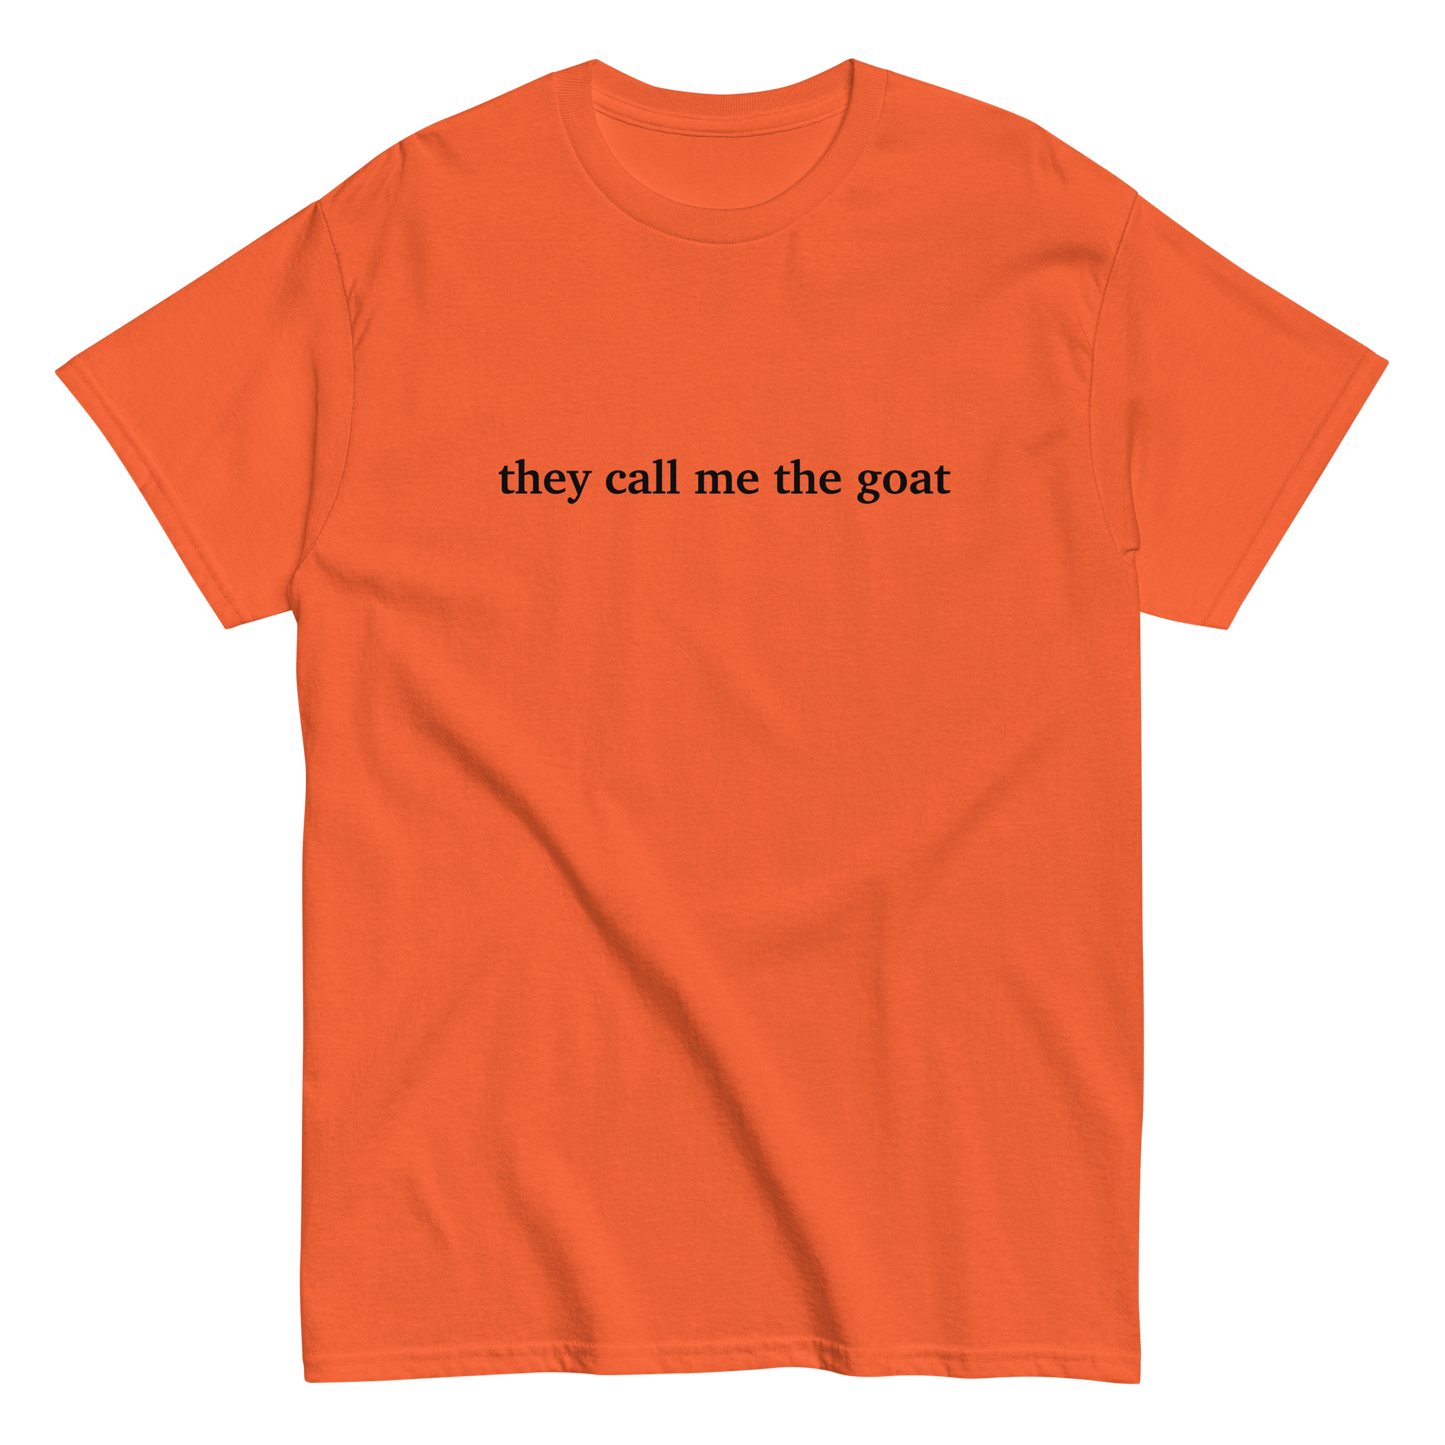 'they call me the goat' Tee